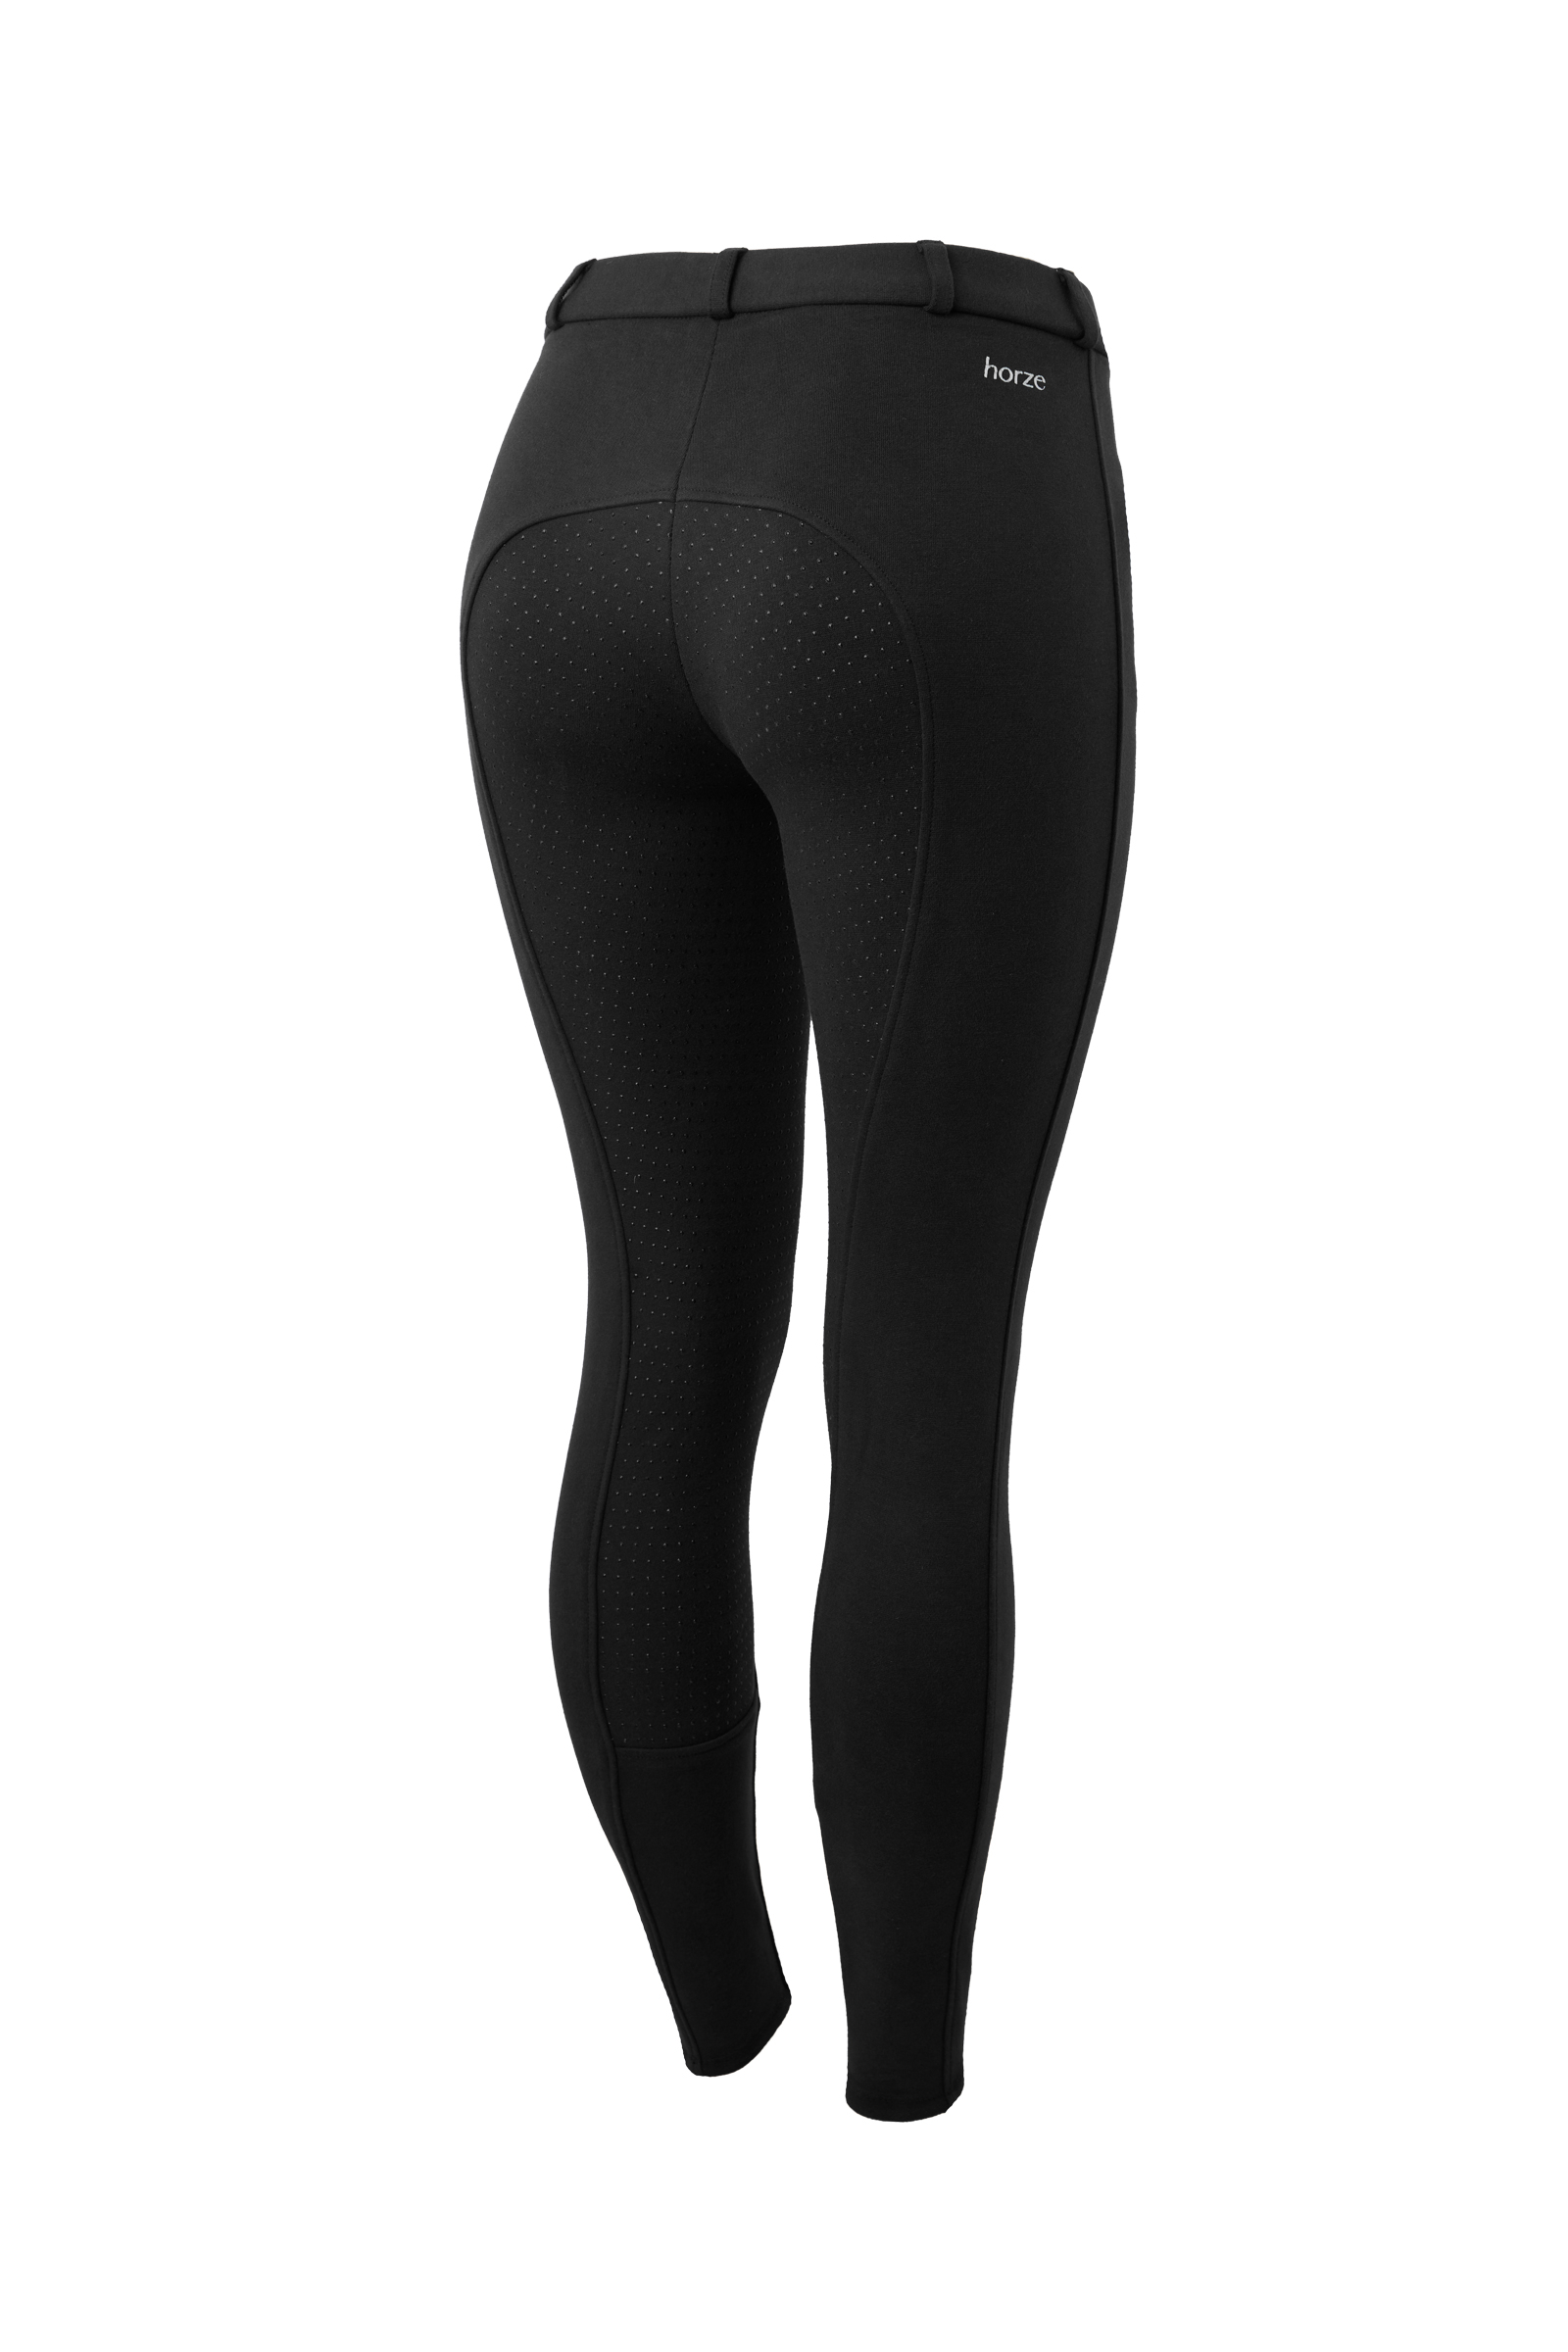  HORZE Remy Women's Sustainable Organic Cotton Silicone Full  Seat Riding Tights with Phone Pocket, Drawstring - Black - 30 : Clothing,  Shoes & Jewelry